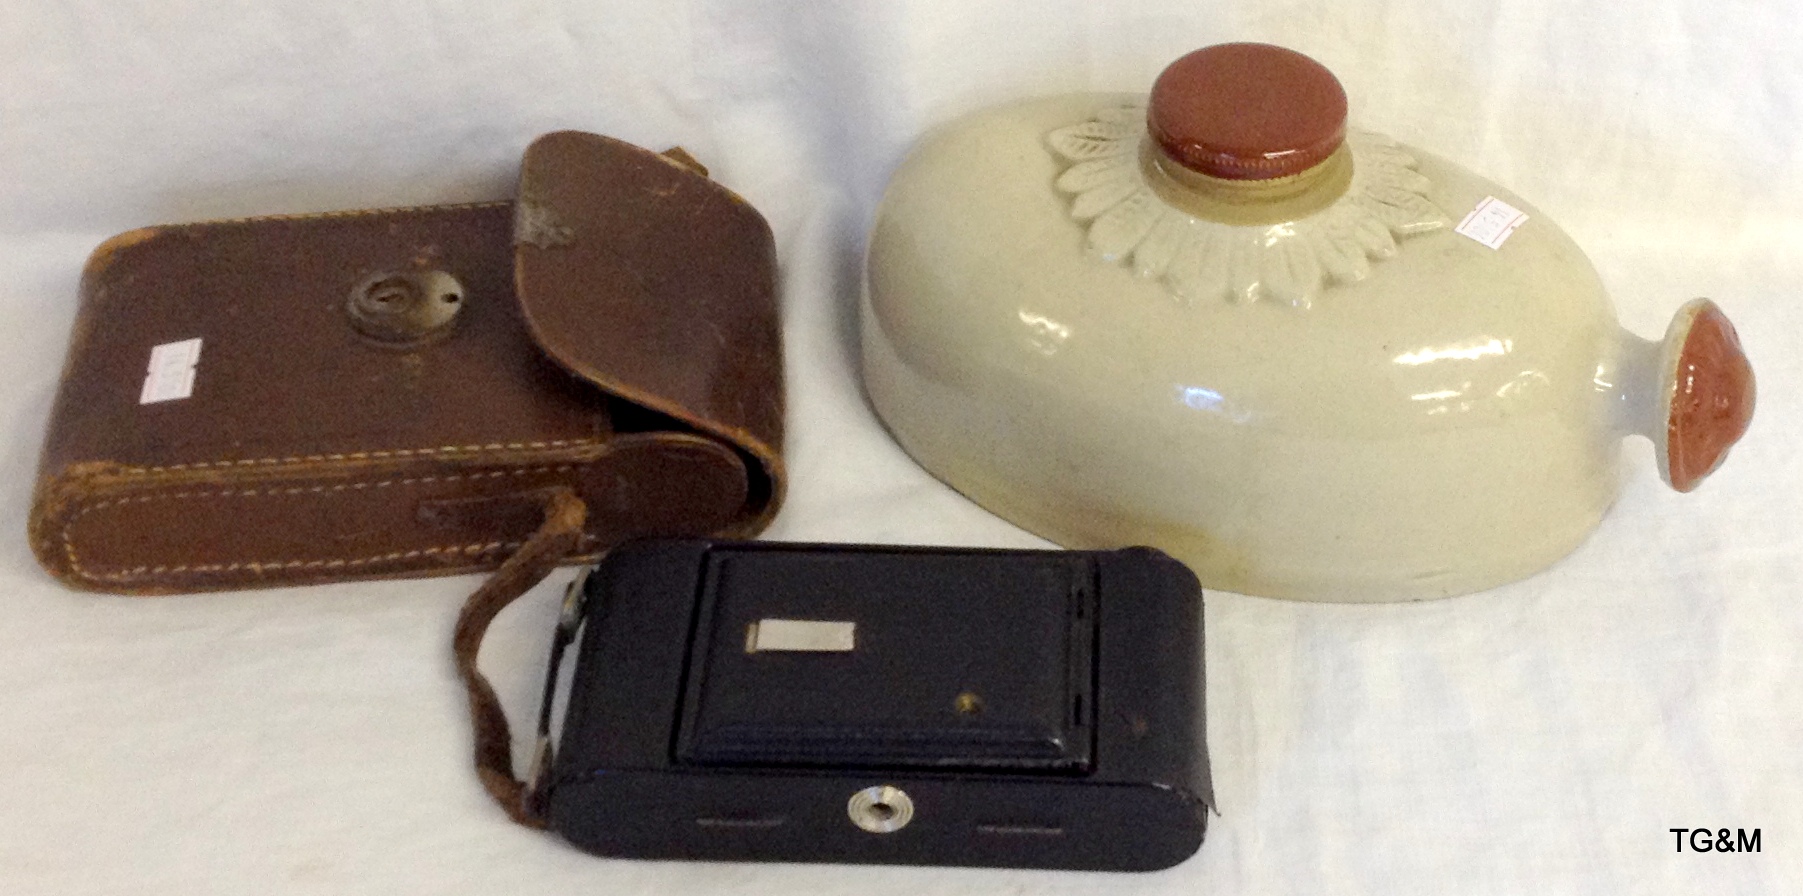 Victorian hot water bottle, vintage bellows and a camera